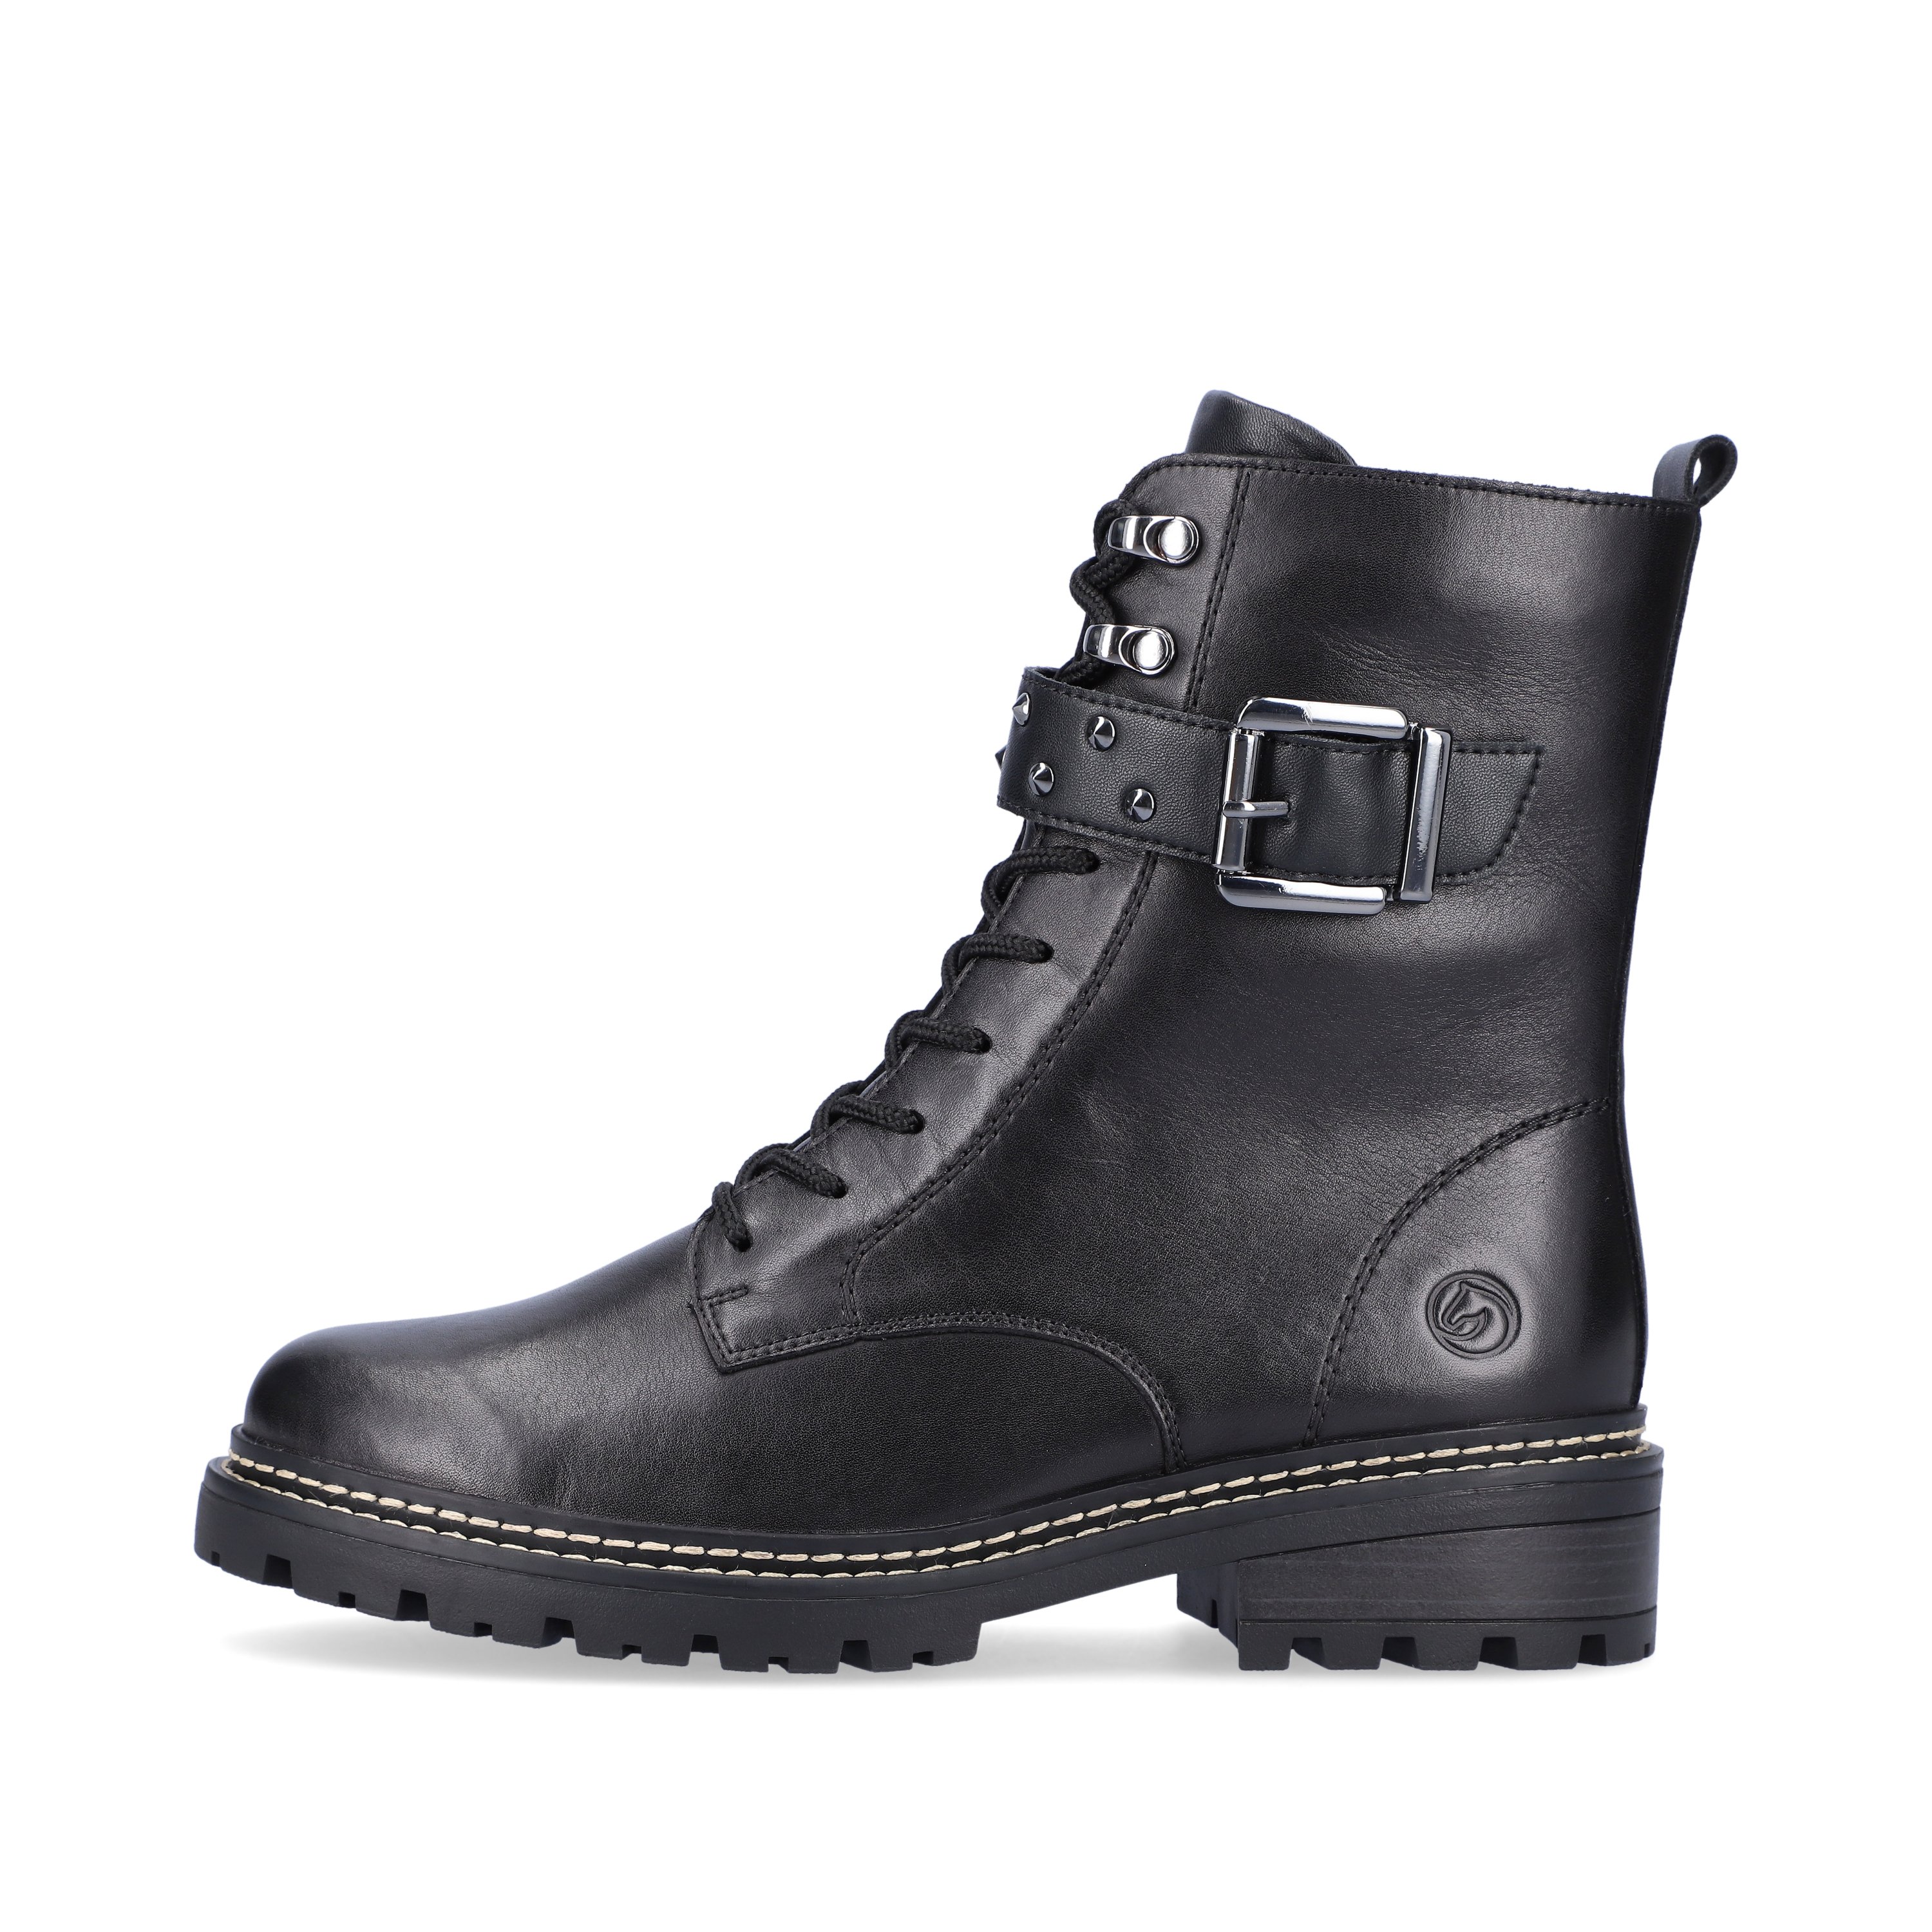 Jet black remonte women´s biker boots D0B73-01 with cushioning profile sole. The outside of the shoe